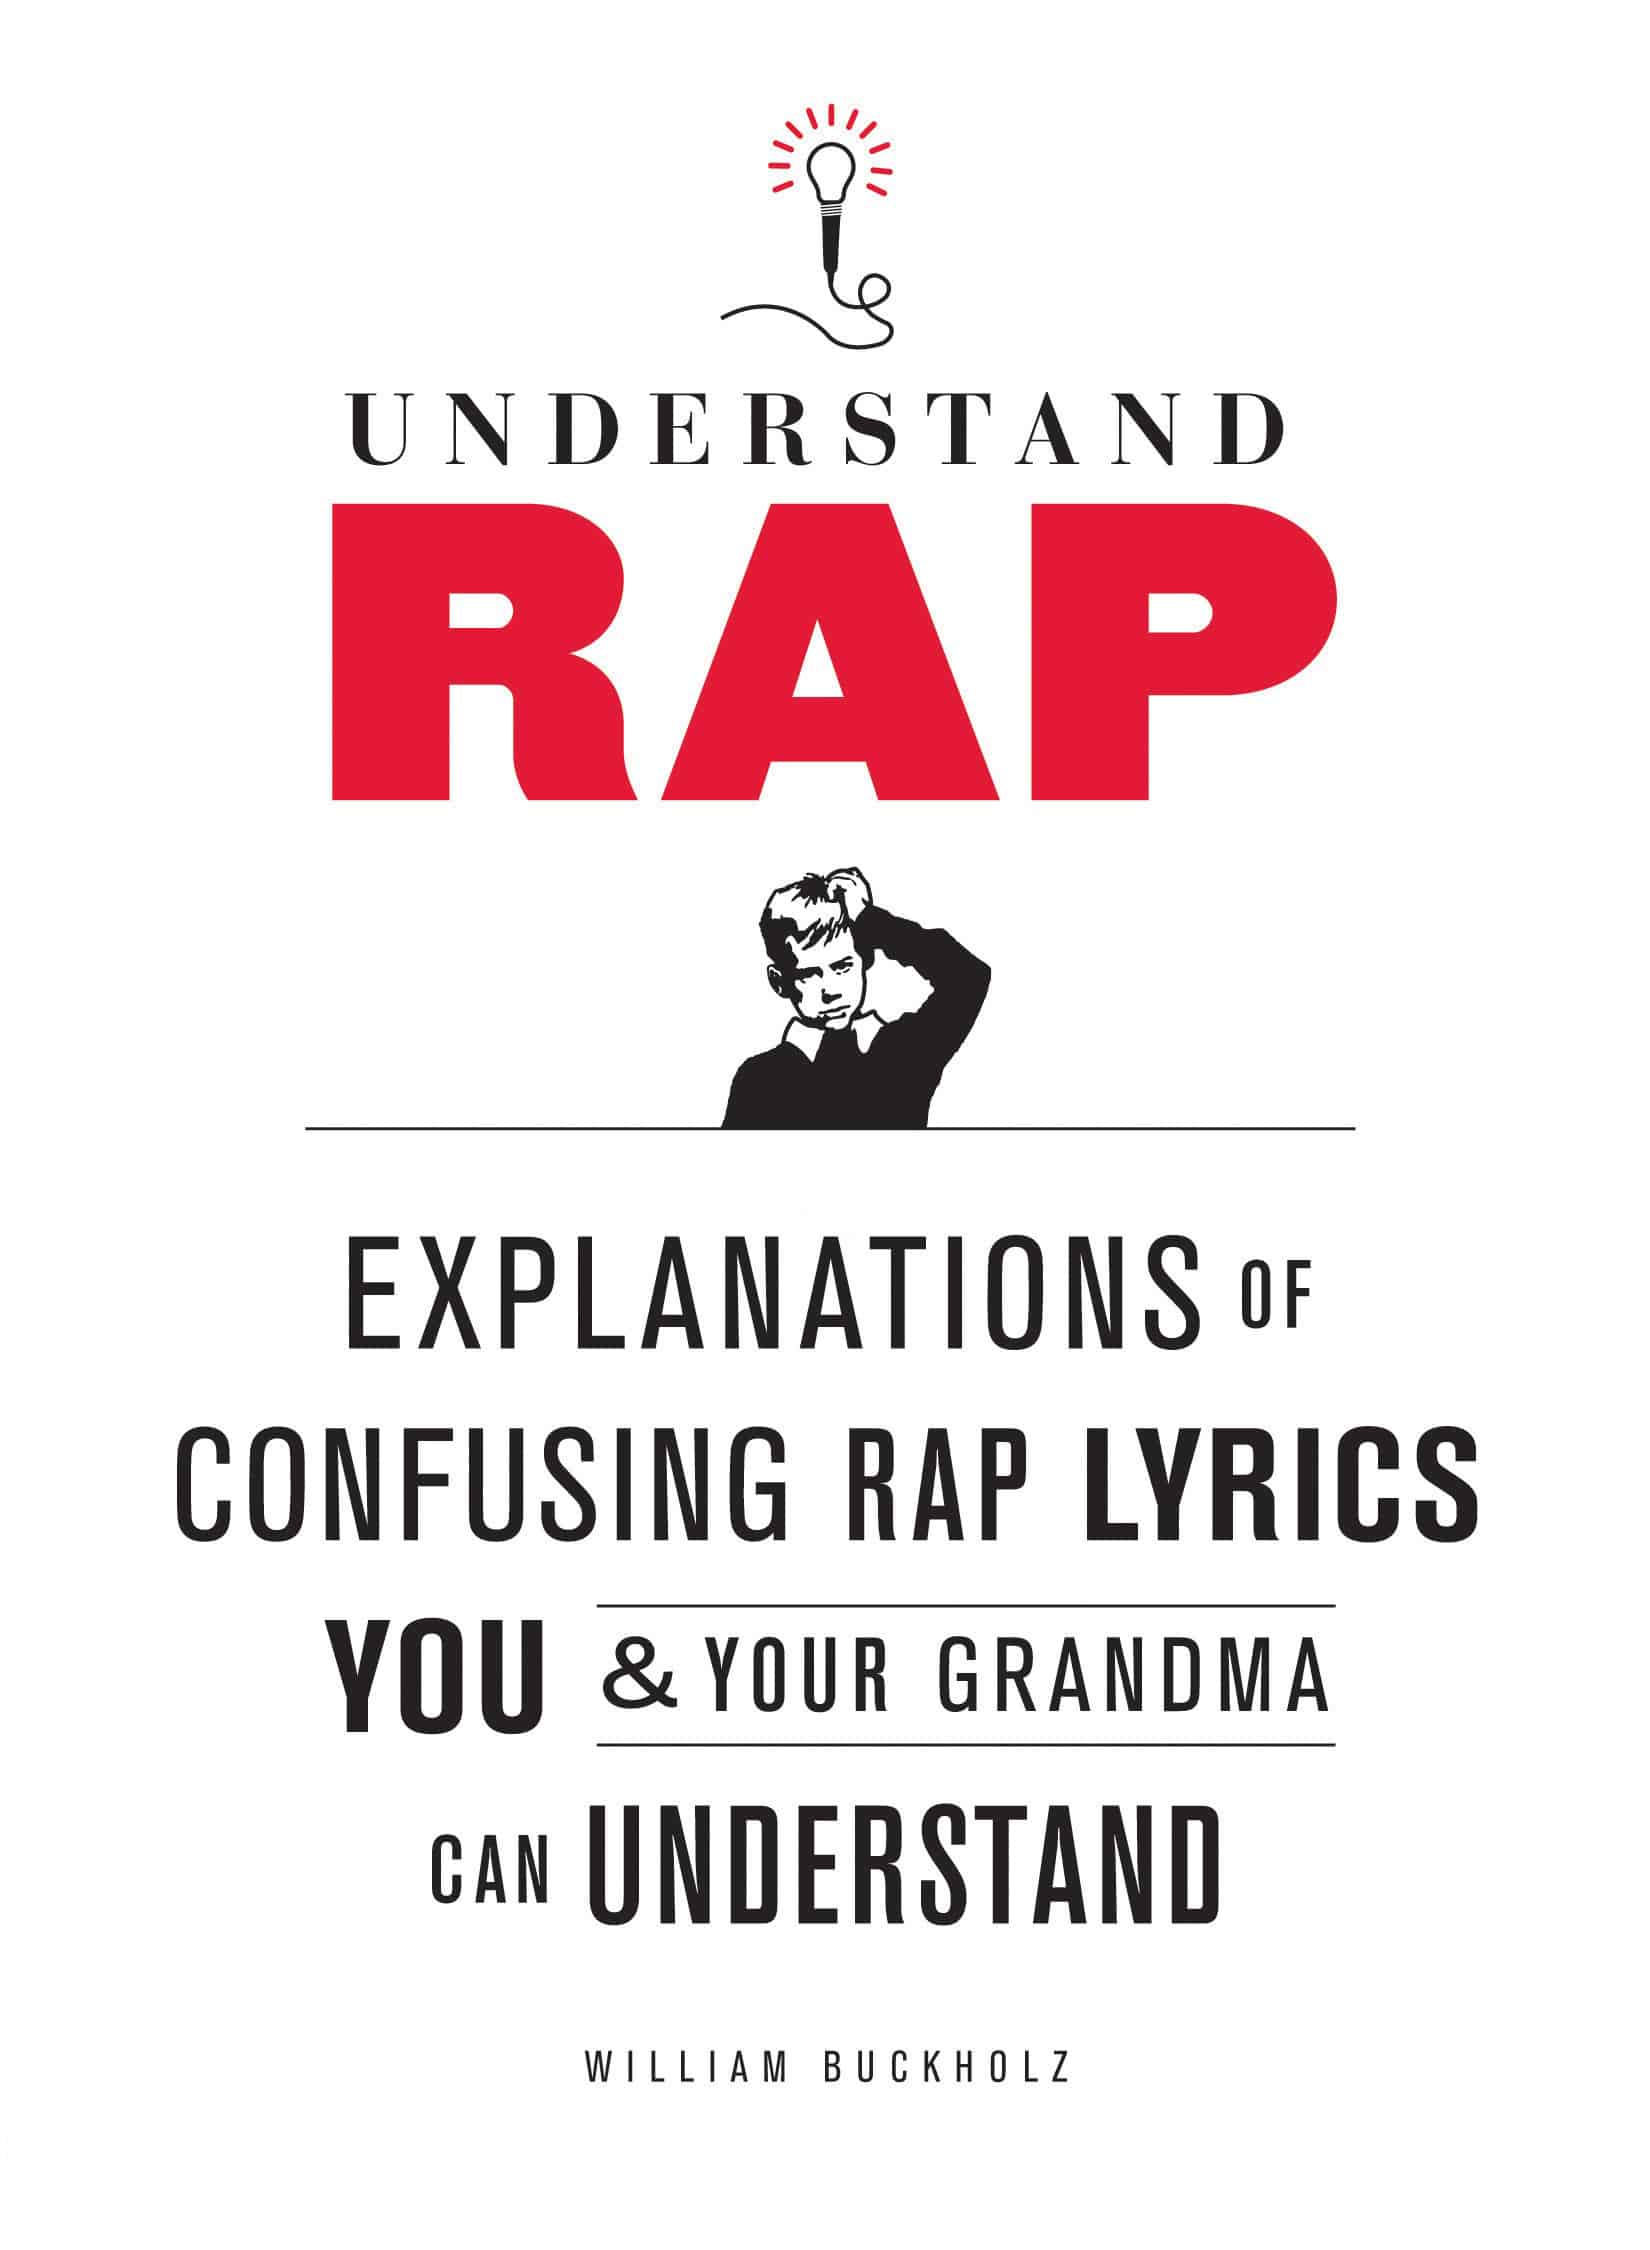 Understand Rap Explanations of Confusing Rap Lyrics that You & Your Grandma Can Understand Front Cool Gift Idea